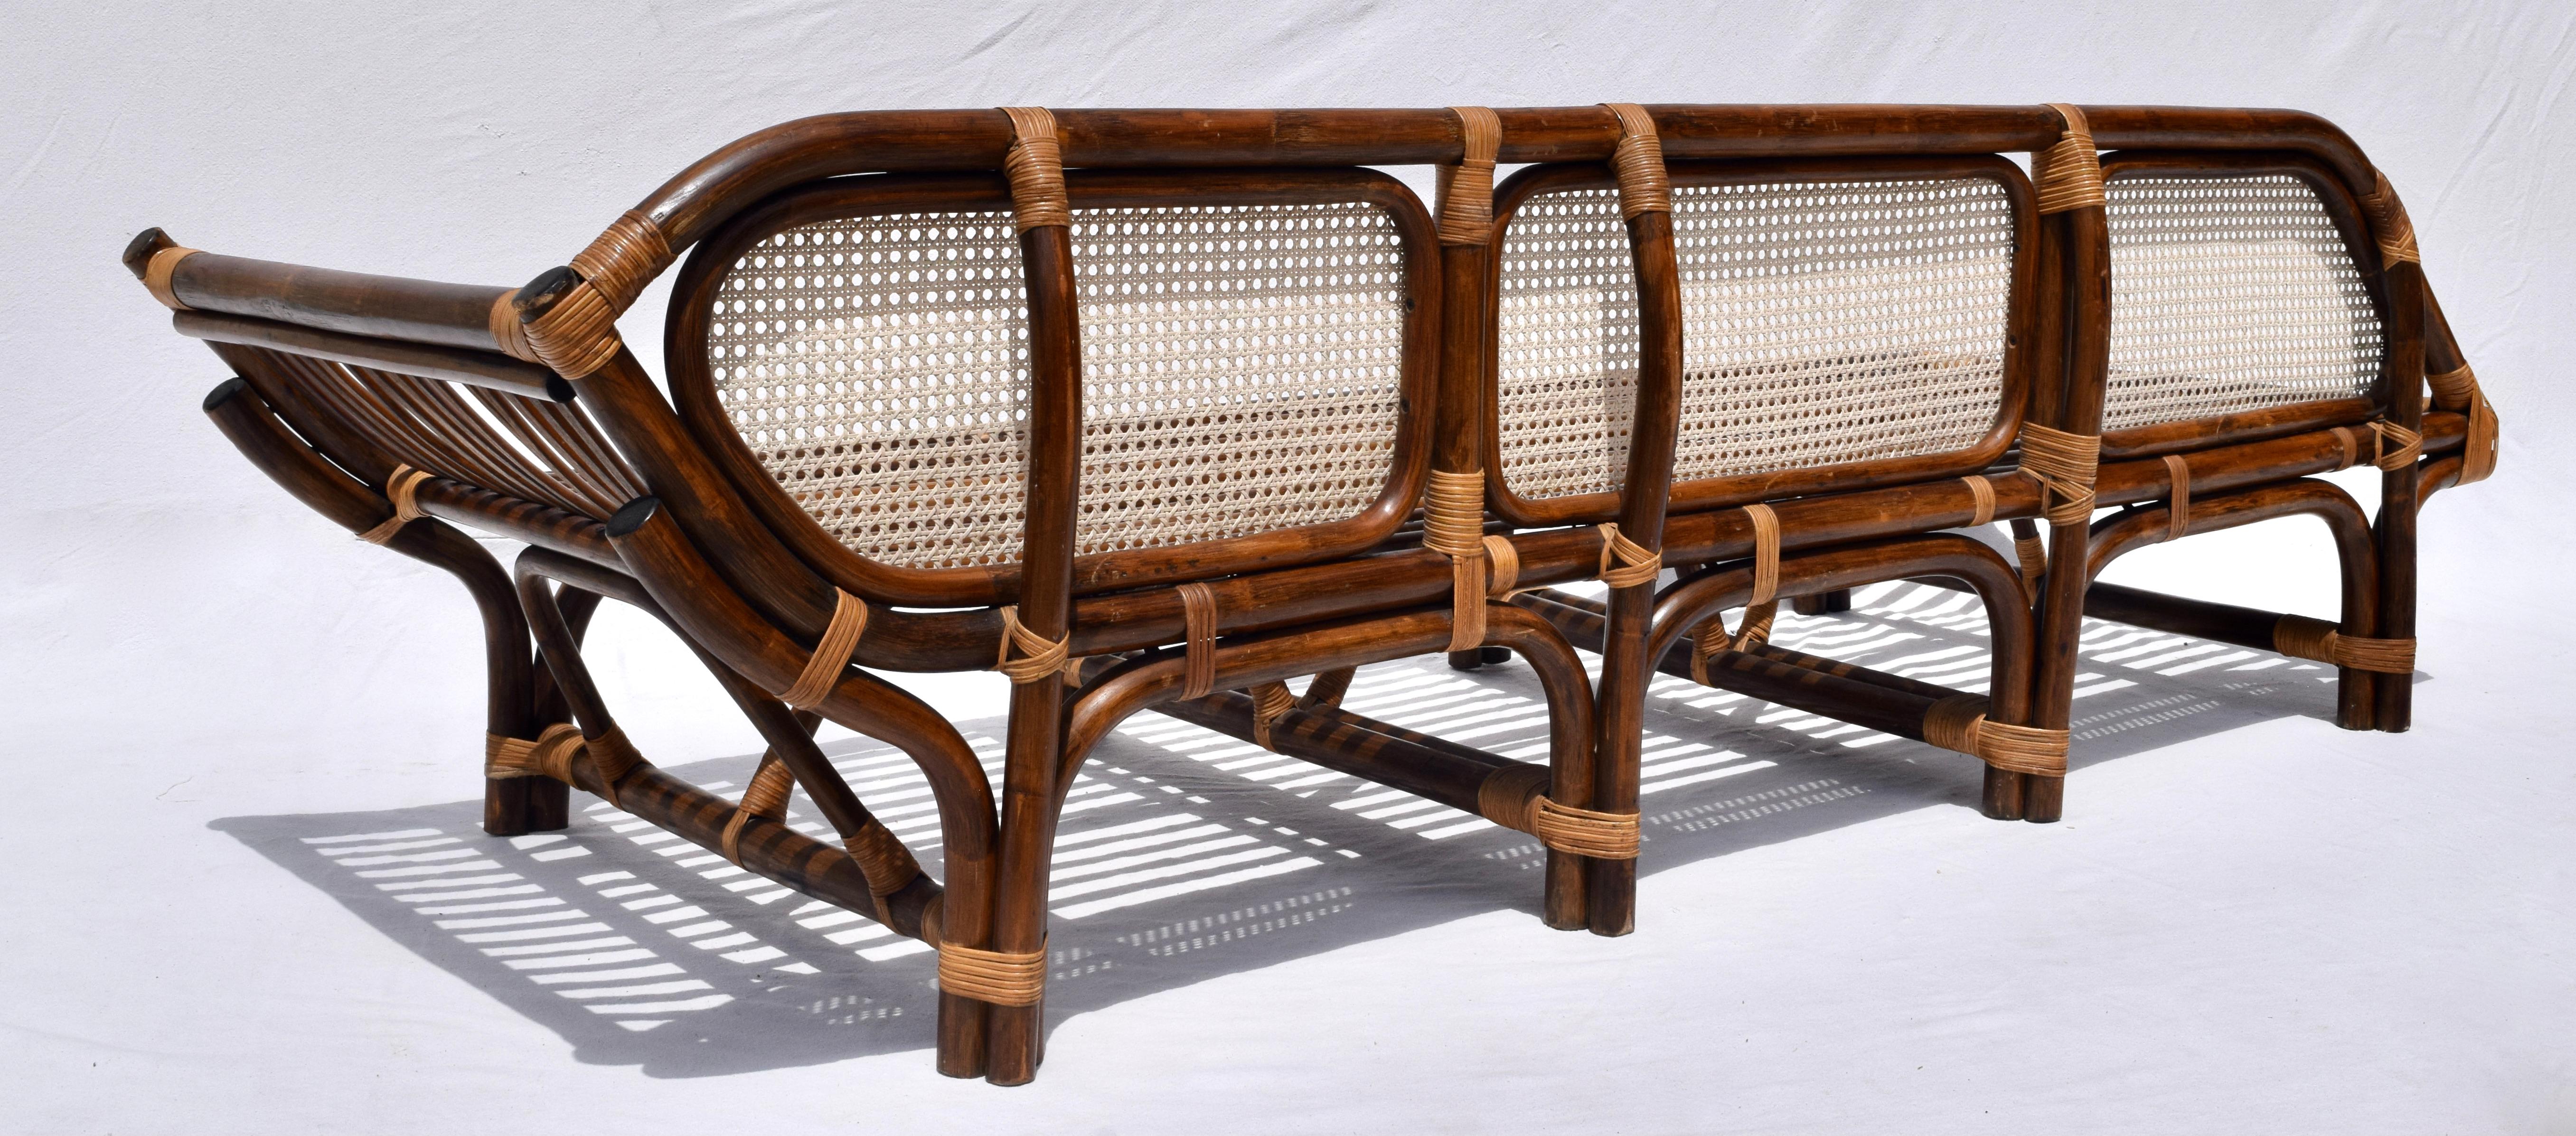 1980's, Bamboo Rattan Caned Daybed Chaise Lounge 2